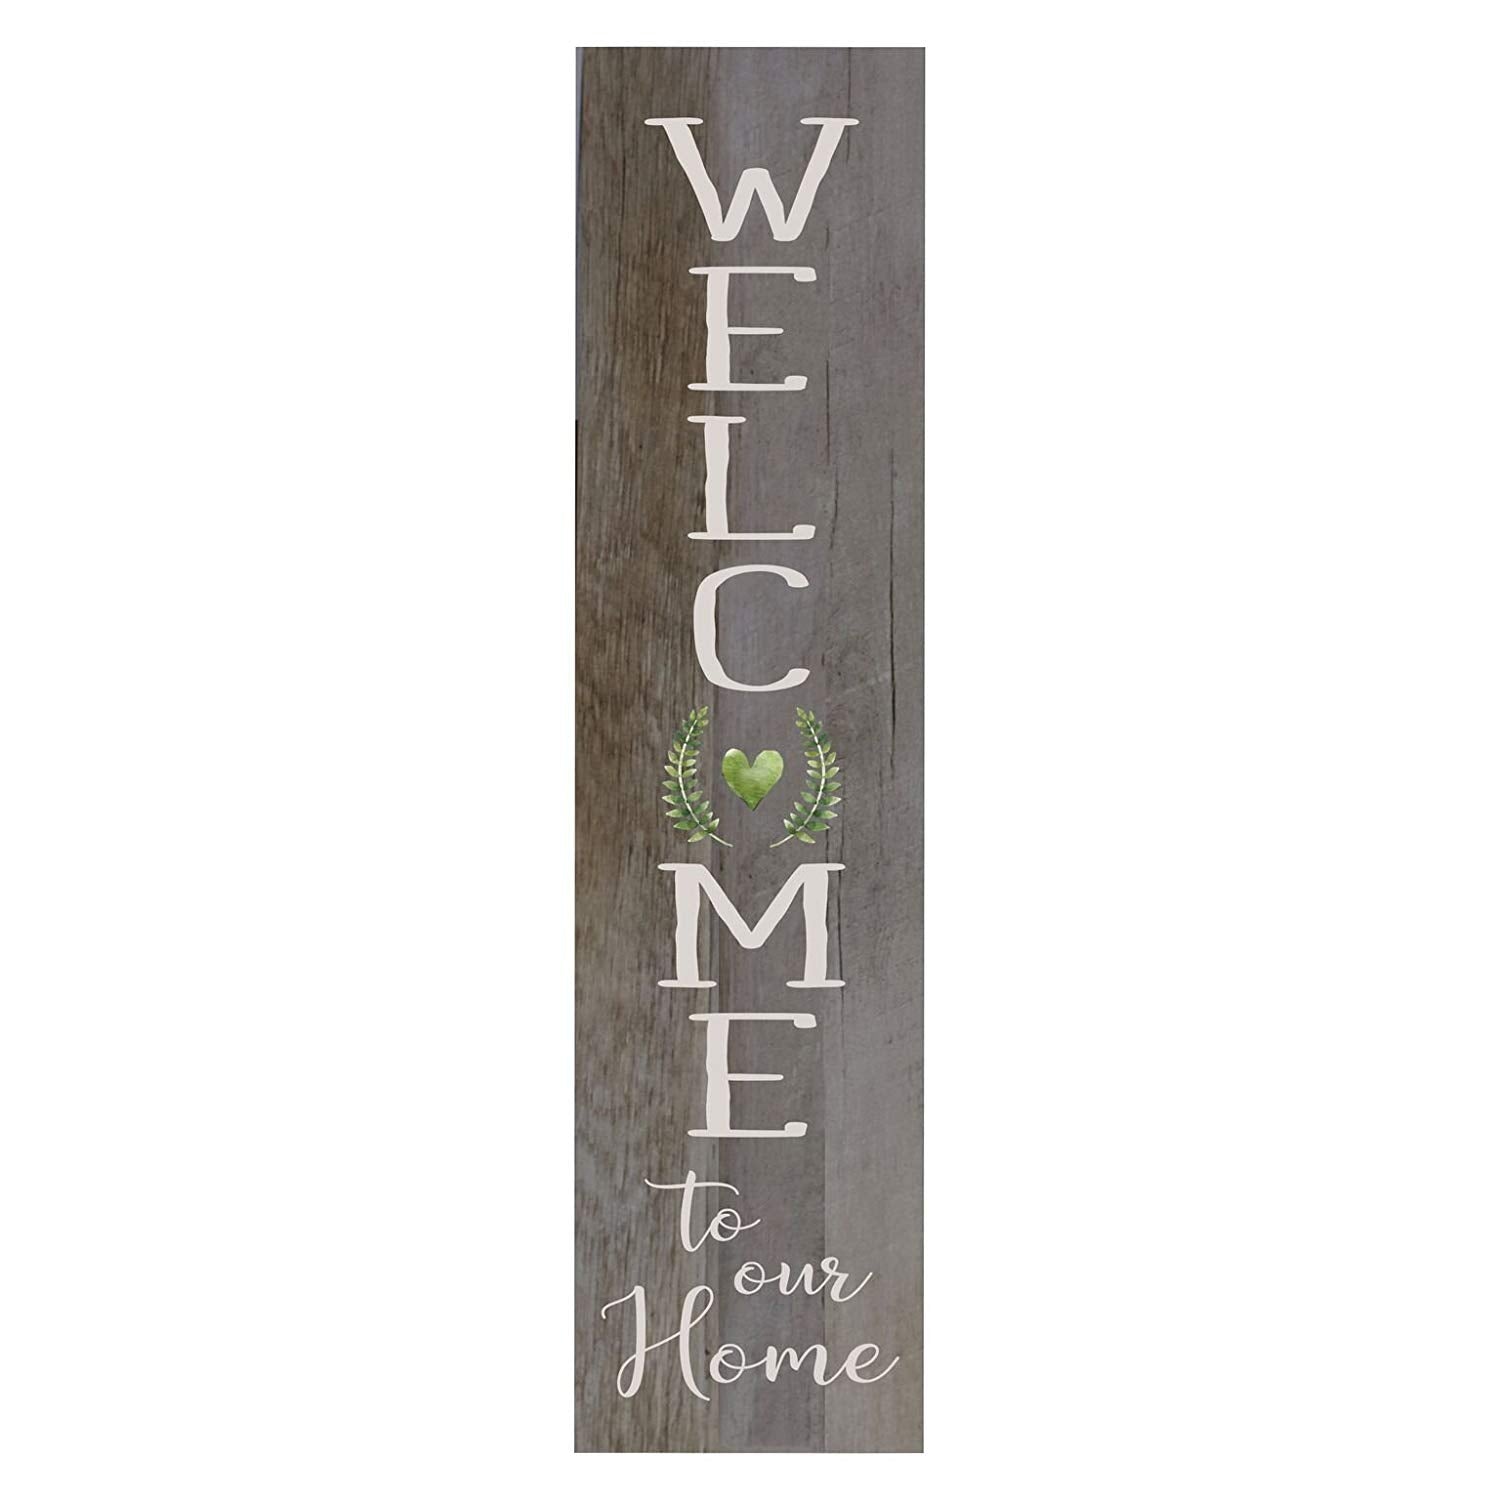 10" x 40" x .0625" Wall Plaque Barnwood Family Home Decoration Welcome Signs - LifeSong Milestones